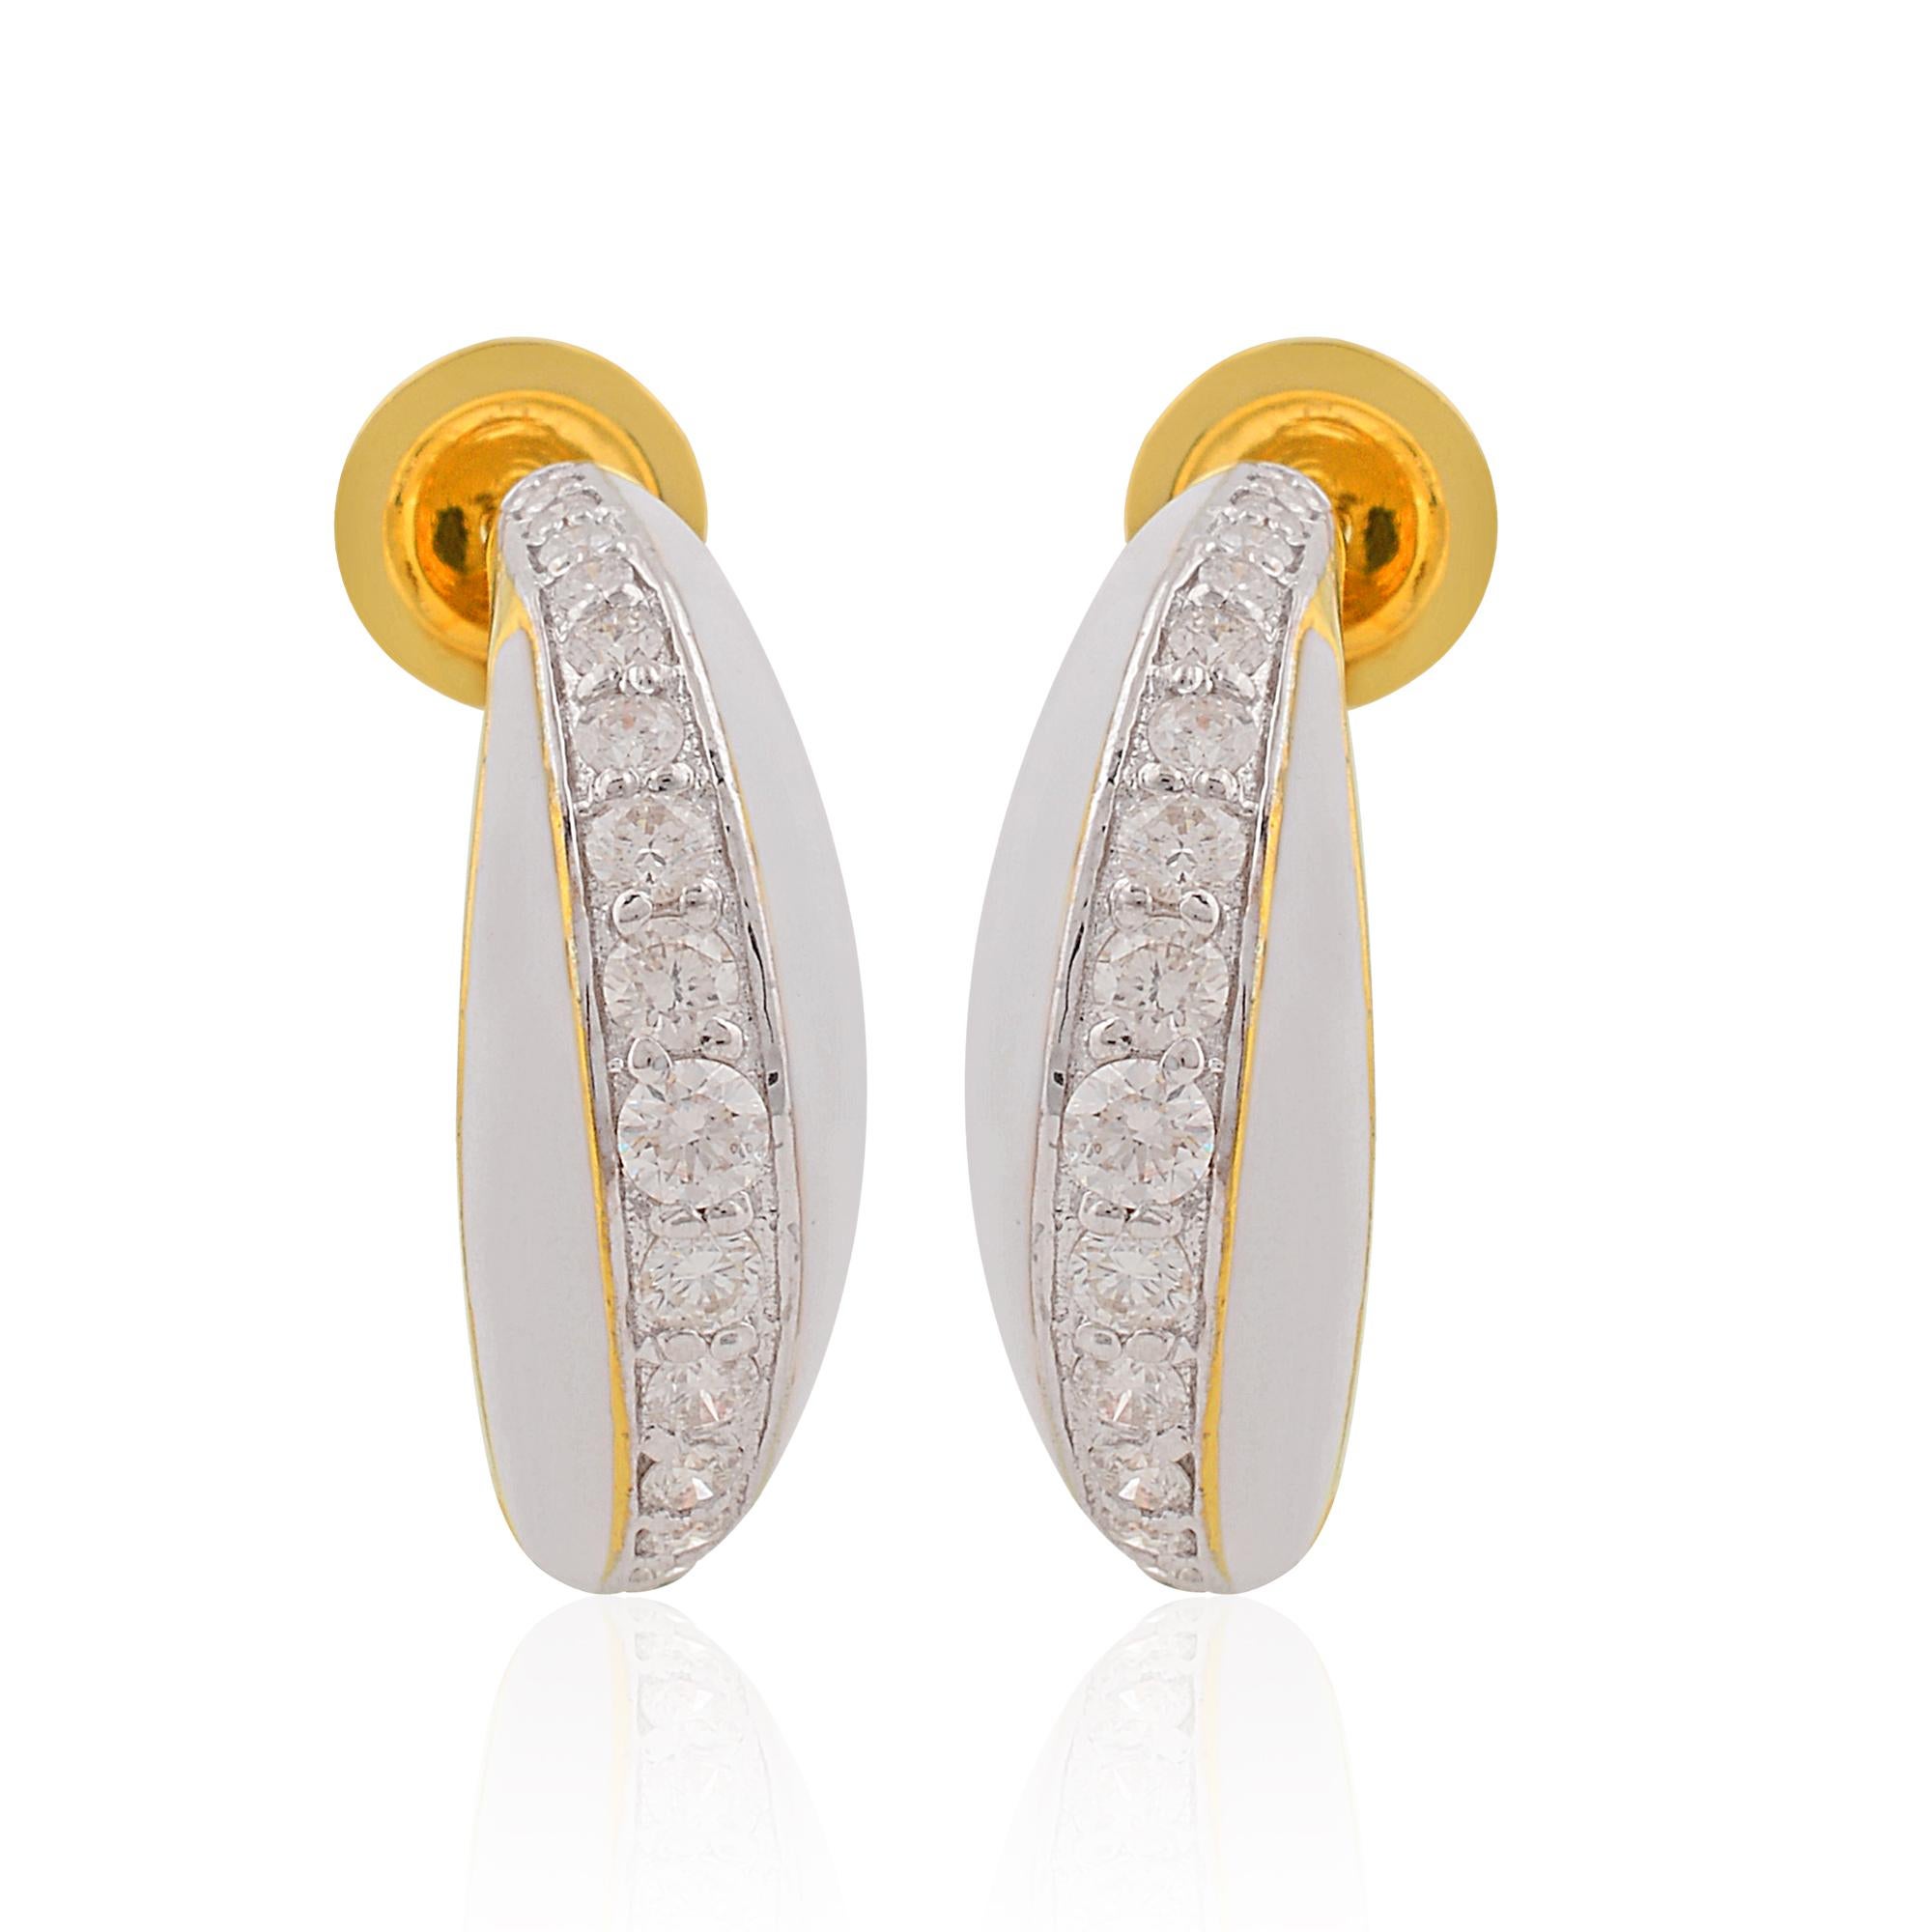 Item Code :- SEE-1498A
Gross Weight :- 7.59 gm
18k Yellow Gold Weight :- 7.38 gm
Diamond Weight :- 1.03 Carat  ( AVERAGE DIAMOND CLARITY SI1-SI2 & COLOR H-I )
Earrings Length :- 15 mm approx.
✦ Sizing
.....................
We can adjust most items